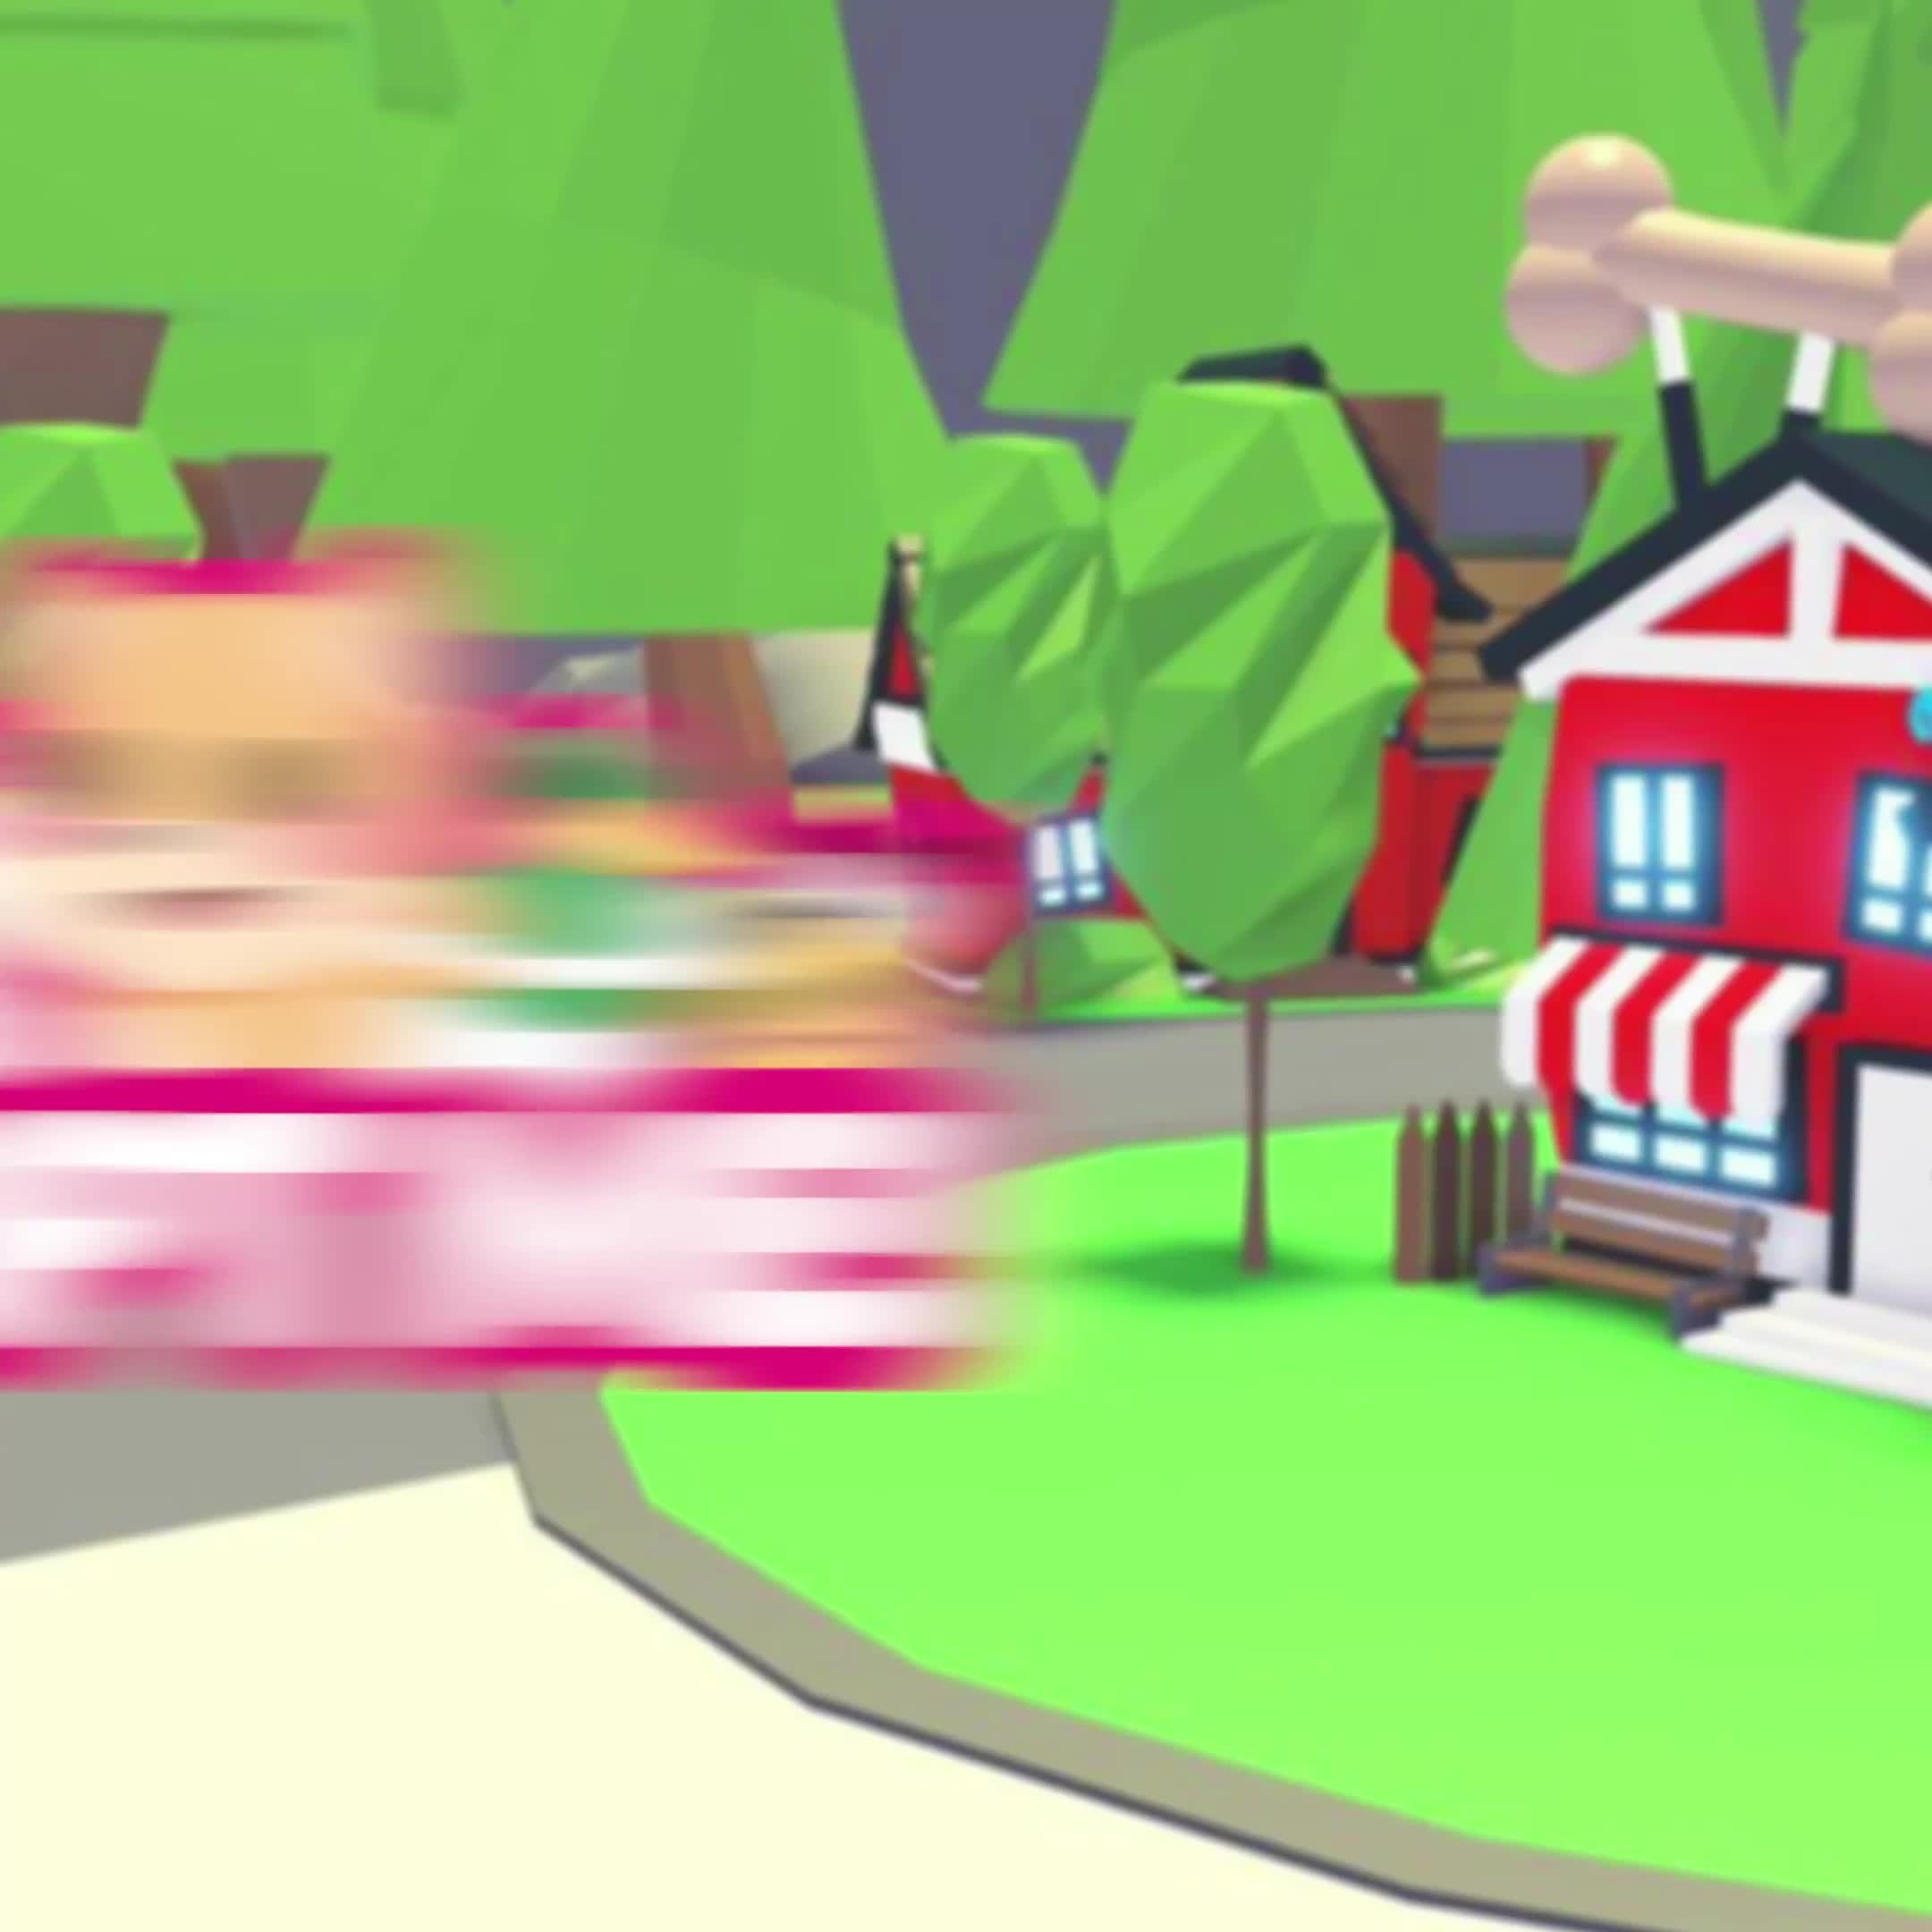 NEW* PET AGE UP HOUSE in ADOPT ME! Let's Build (roblox) 